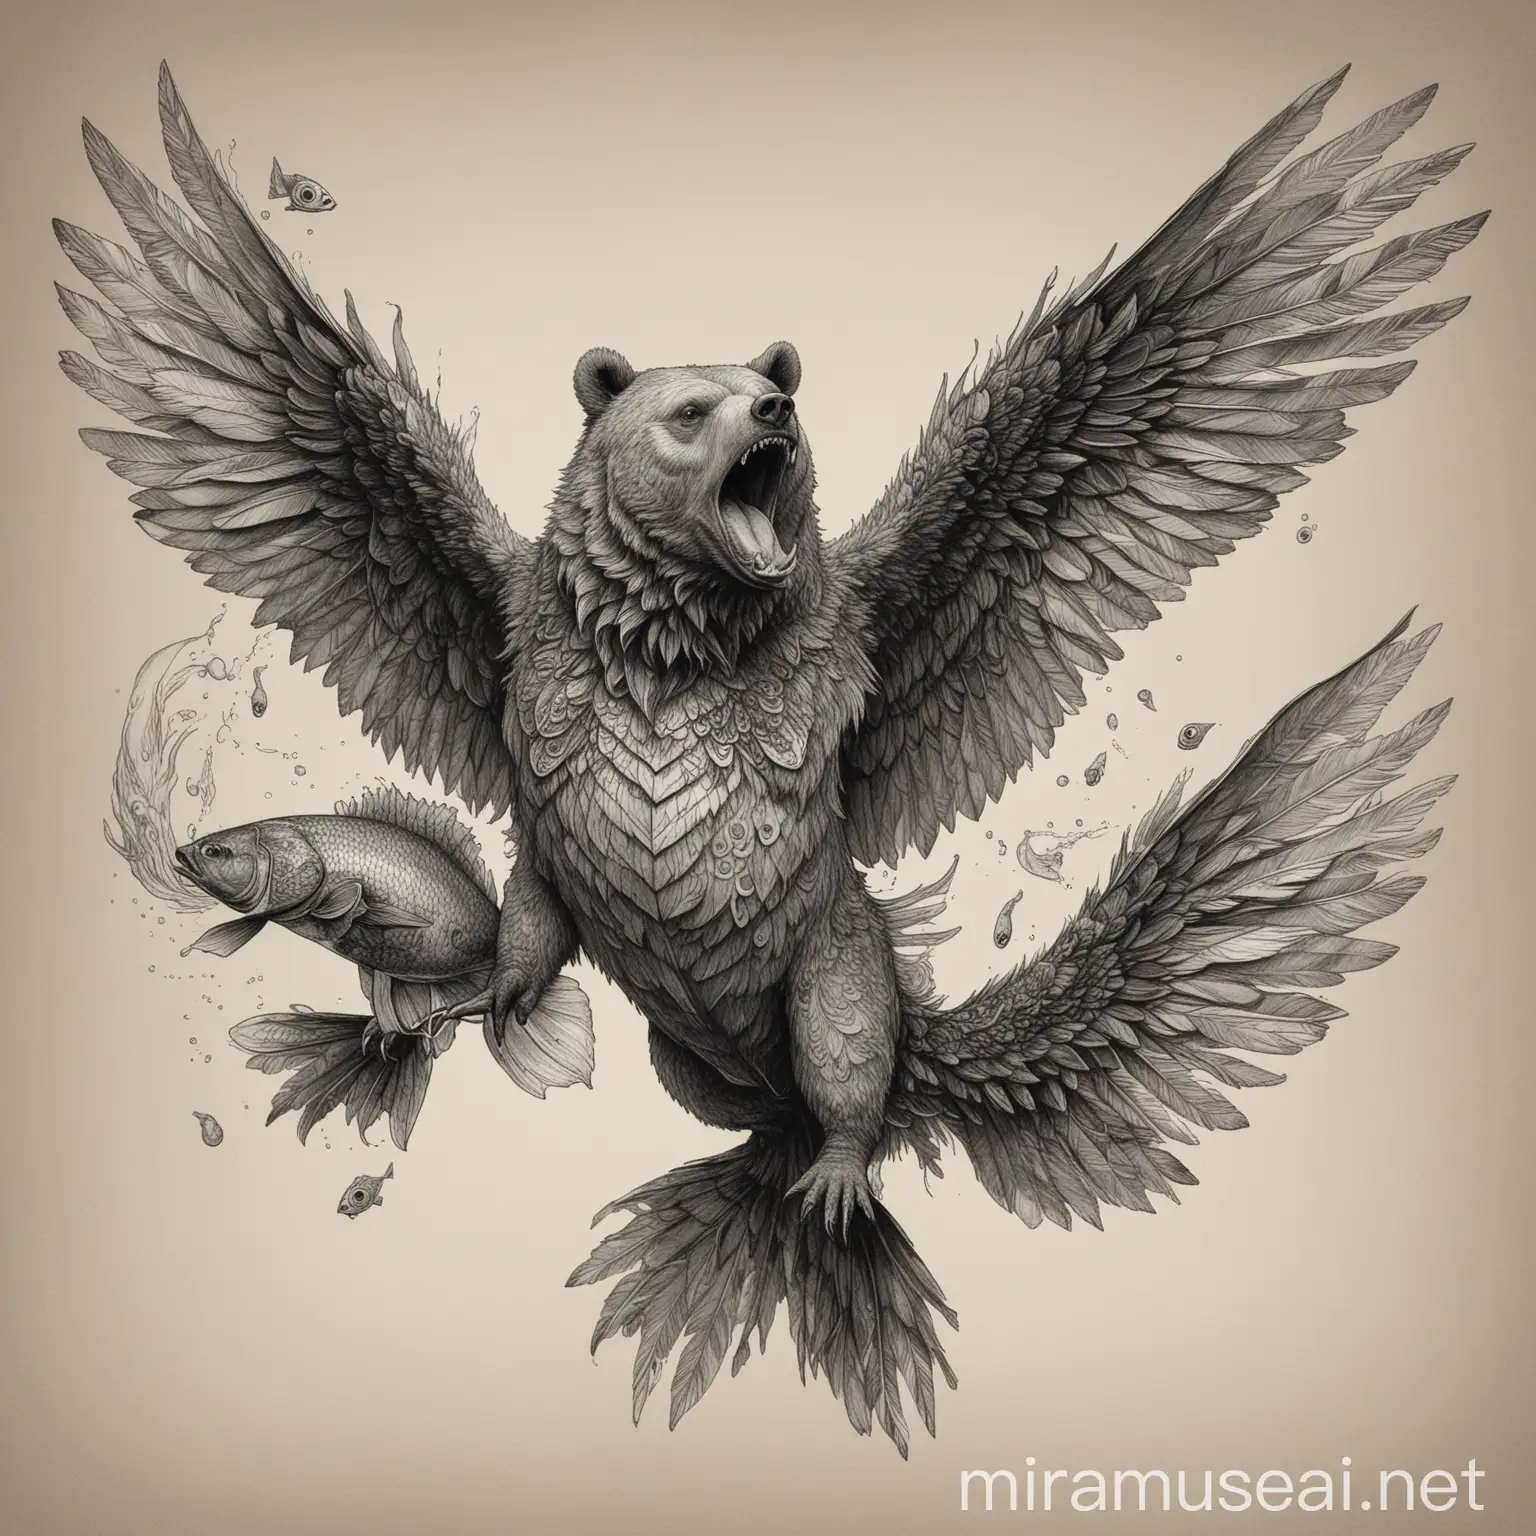 Fantastical BearFish Creature with Feathered Wings Sketch